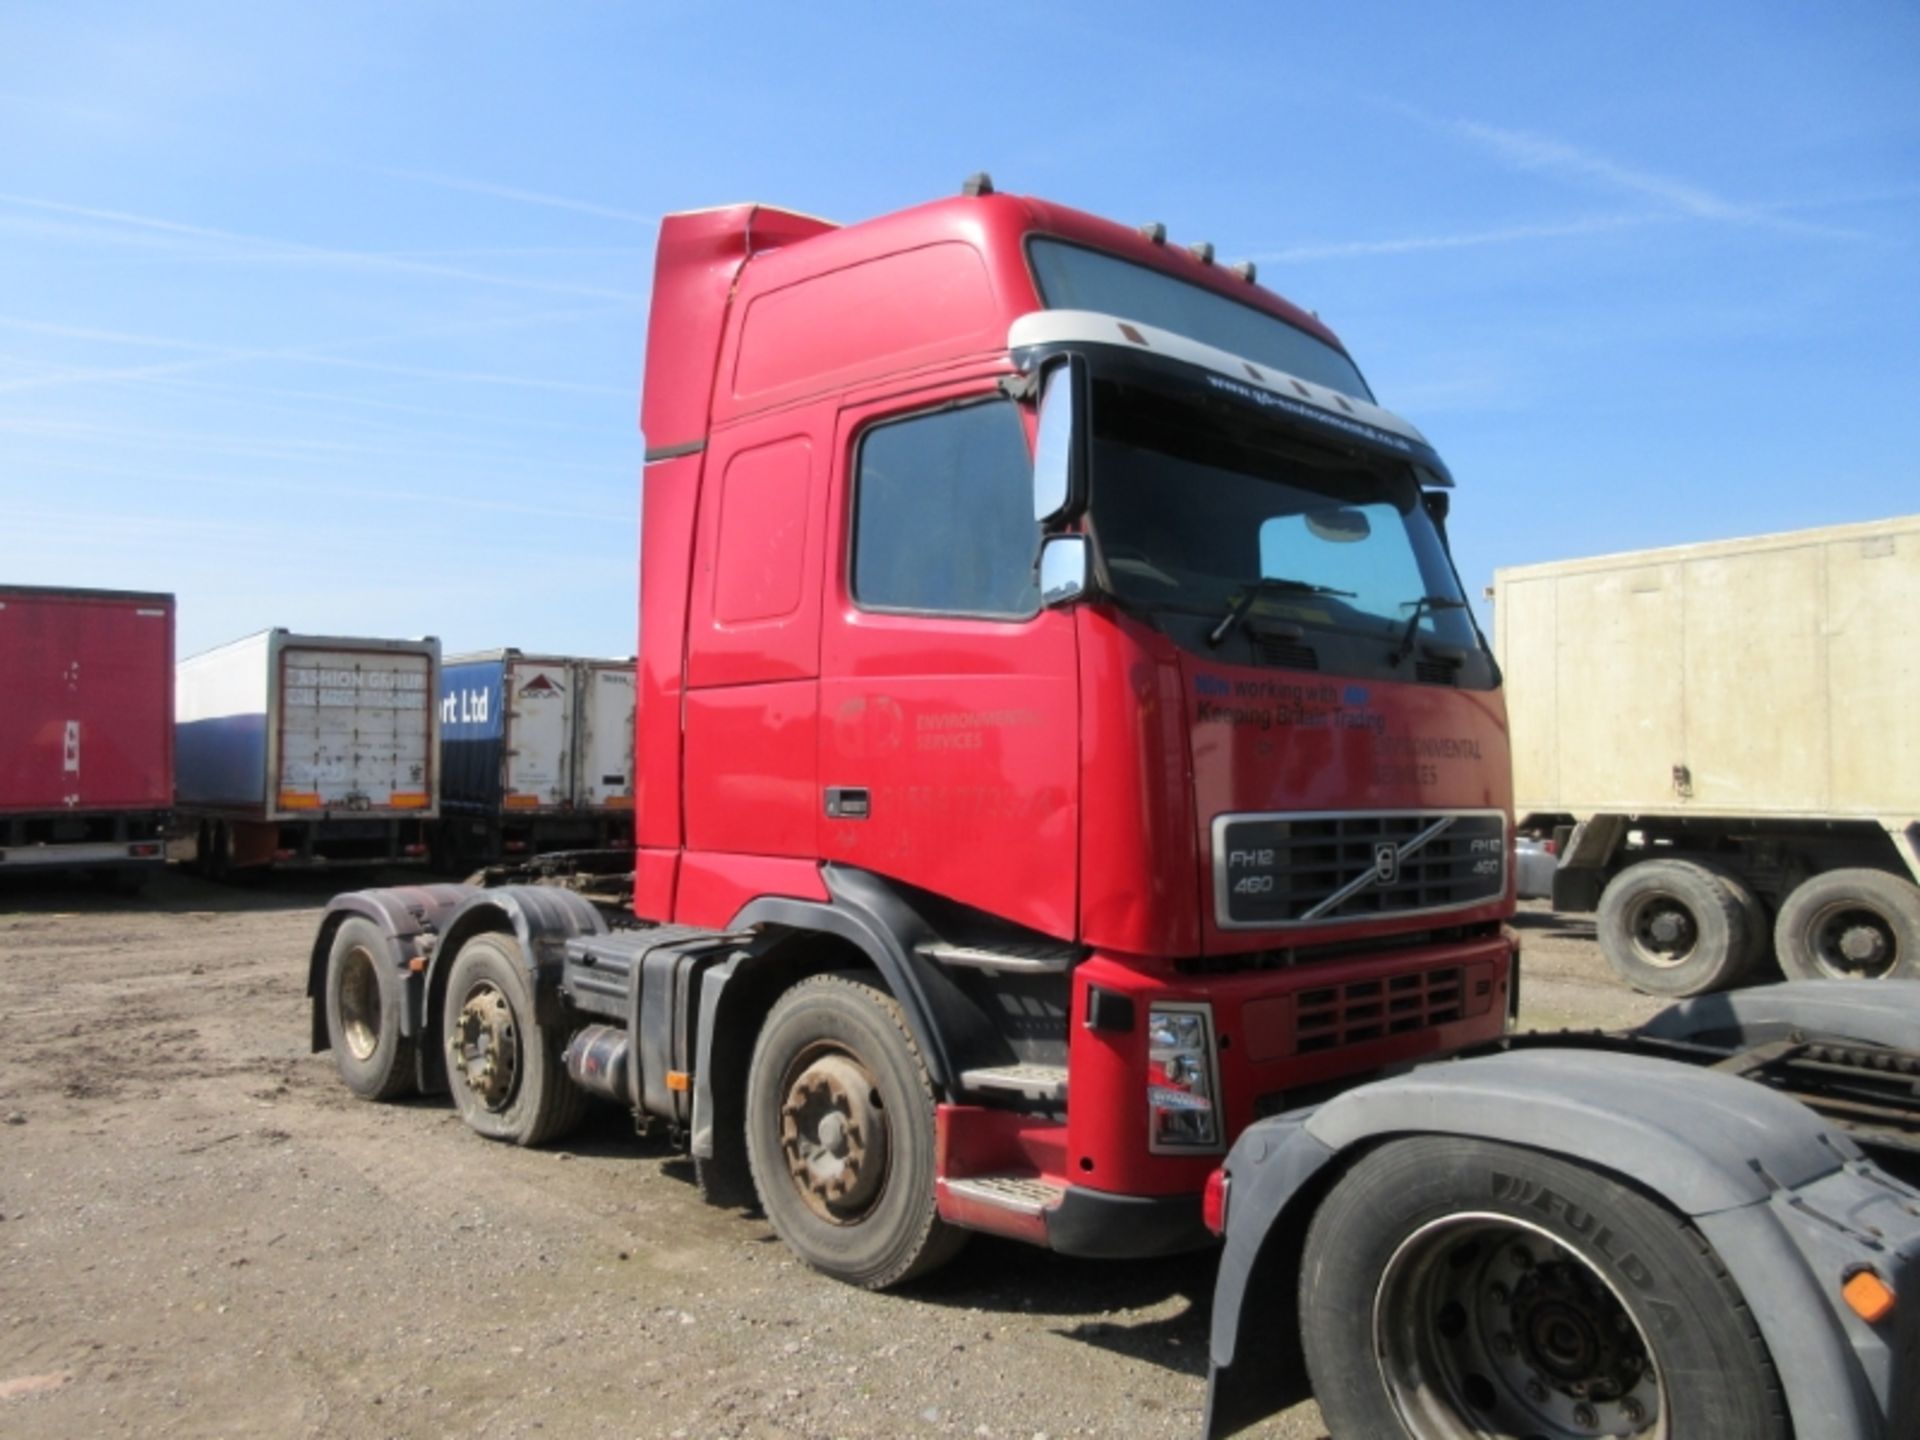 VOLVO FH 460 - 12130cc Globetrotter XL Diesel Automatic - VIN: YV2A4CEC64A589378 - Year: 2004 - NO - Image 4 of 8